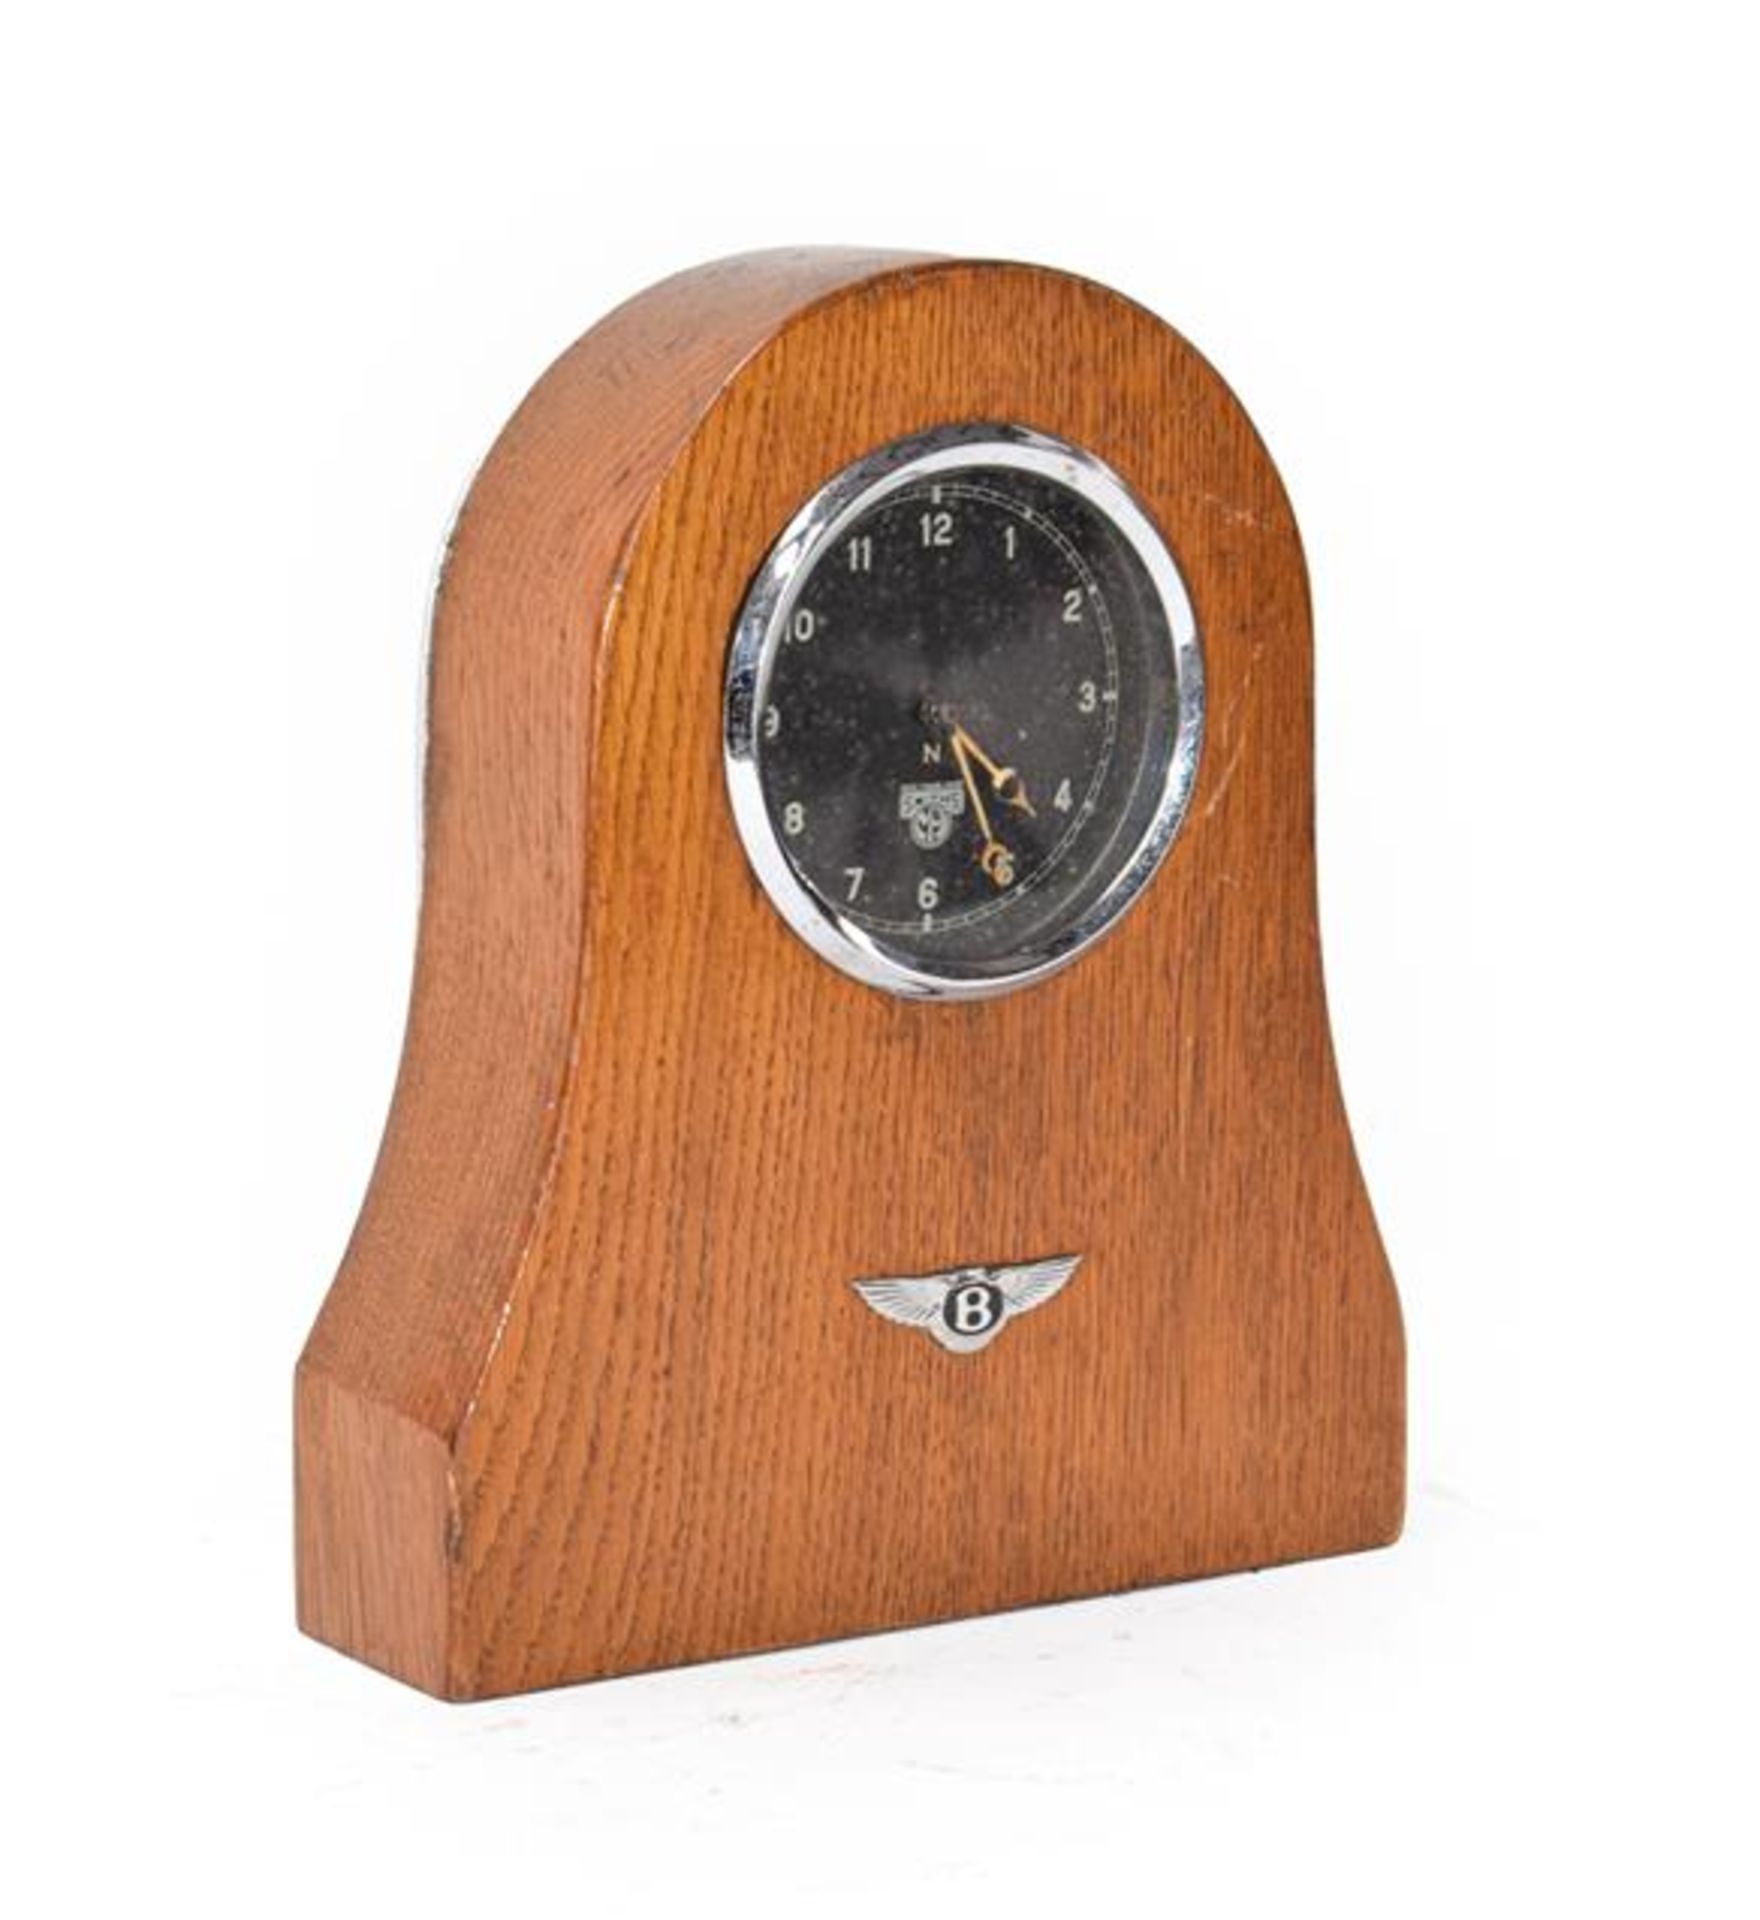 A 1930's Smith's Car Clock, mounted in an oak case with Bentley winged badge emblem, 20cm high